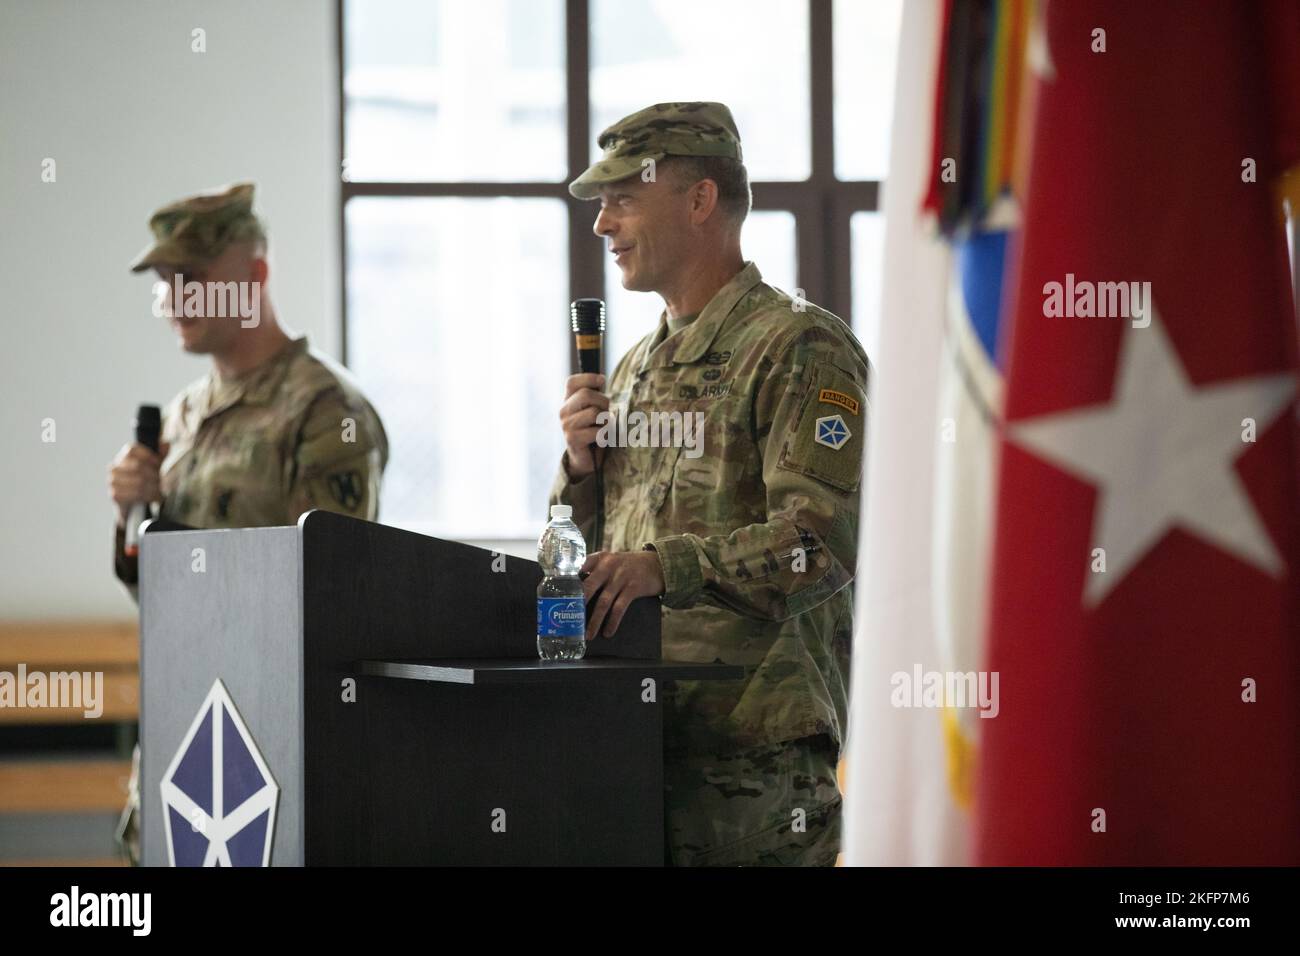 U.S. Army Lt. John S. Kolasheski, commanding general of V Corps, delivers remarks officially welcoming his newest deputy commanding general for maneuver, U.S. Army Maj. Gen. David B. Womack, at the Victory Honors Ceremony at Camp Kosciuszko, Poznan, Poland, Sept. 30, 2022. Womack becomes the first deputy commanding general to join V Corps—the American command and control army element in the European Theater—in Poland since the base renaming to Camp Kosciuszko. V Corps works alongside NATO allies and regional security partners to provide combat-ready forces, executes joint and multinational tra Stock Photo